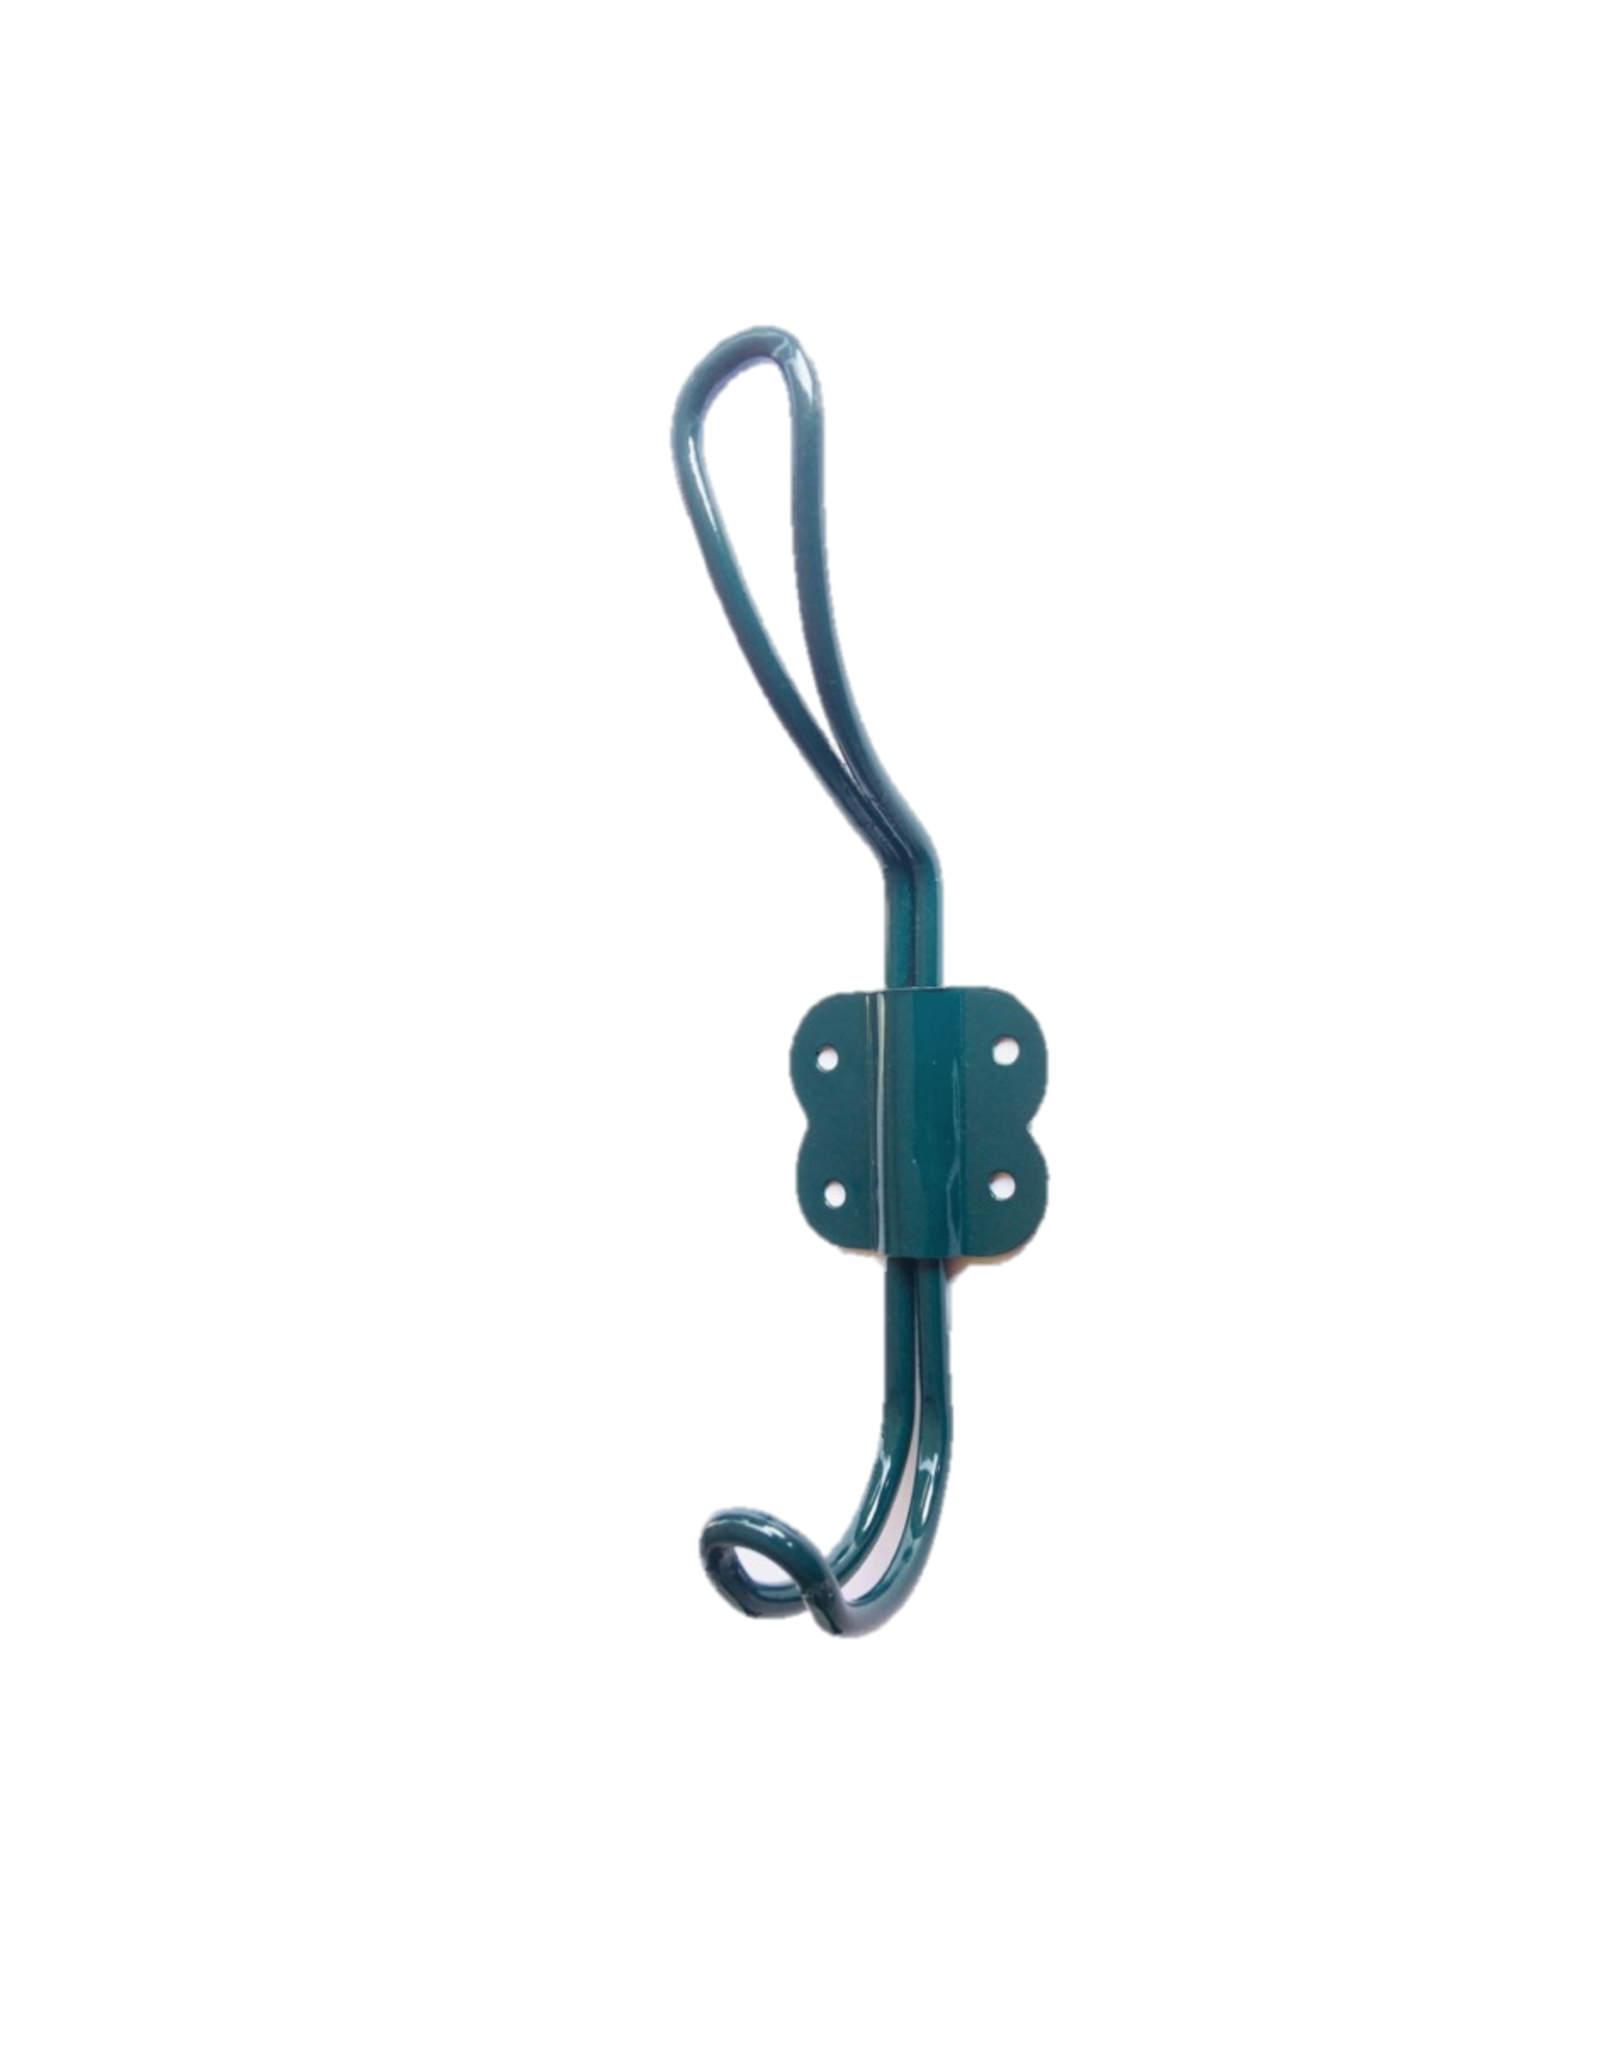 TIMCo NTH - Double Wall Hook / Hairpin, Green, 5.5"